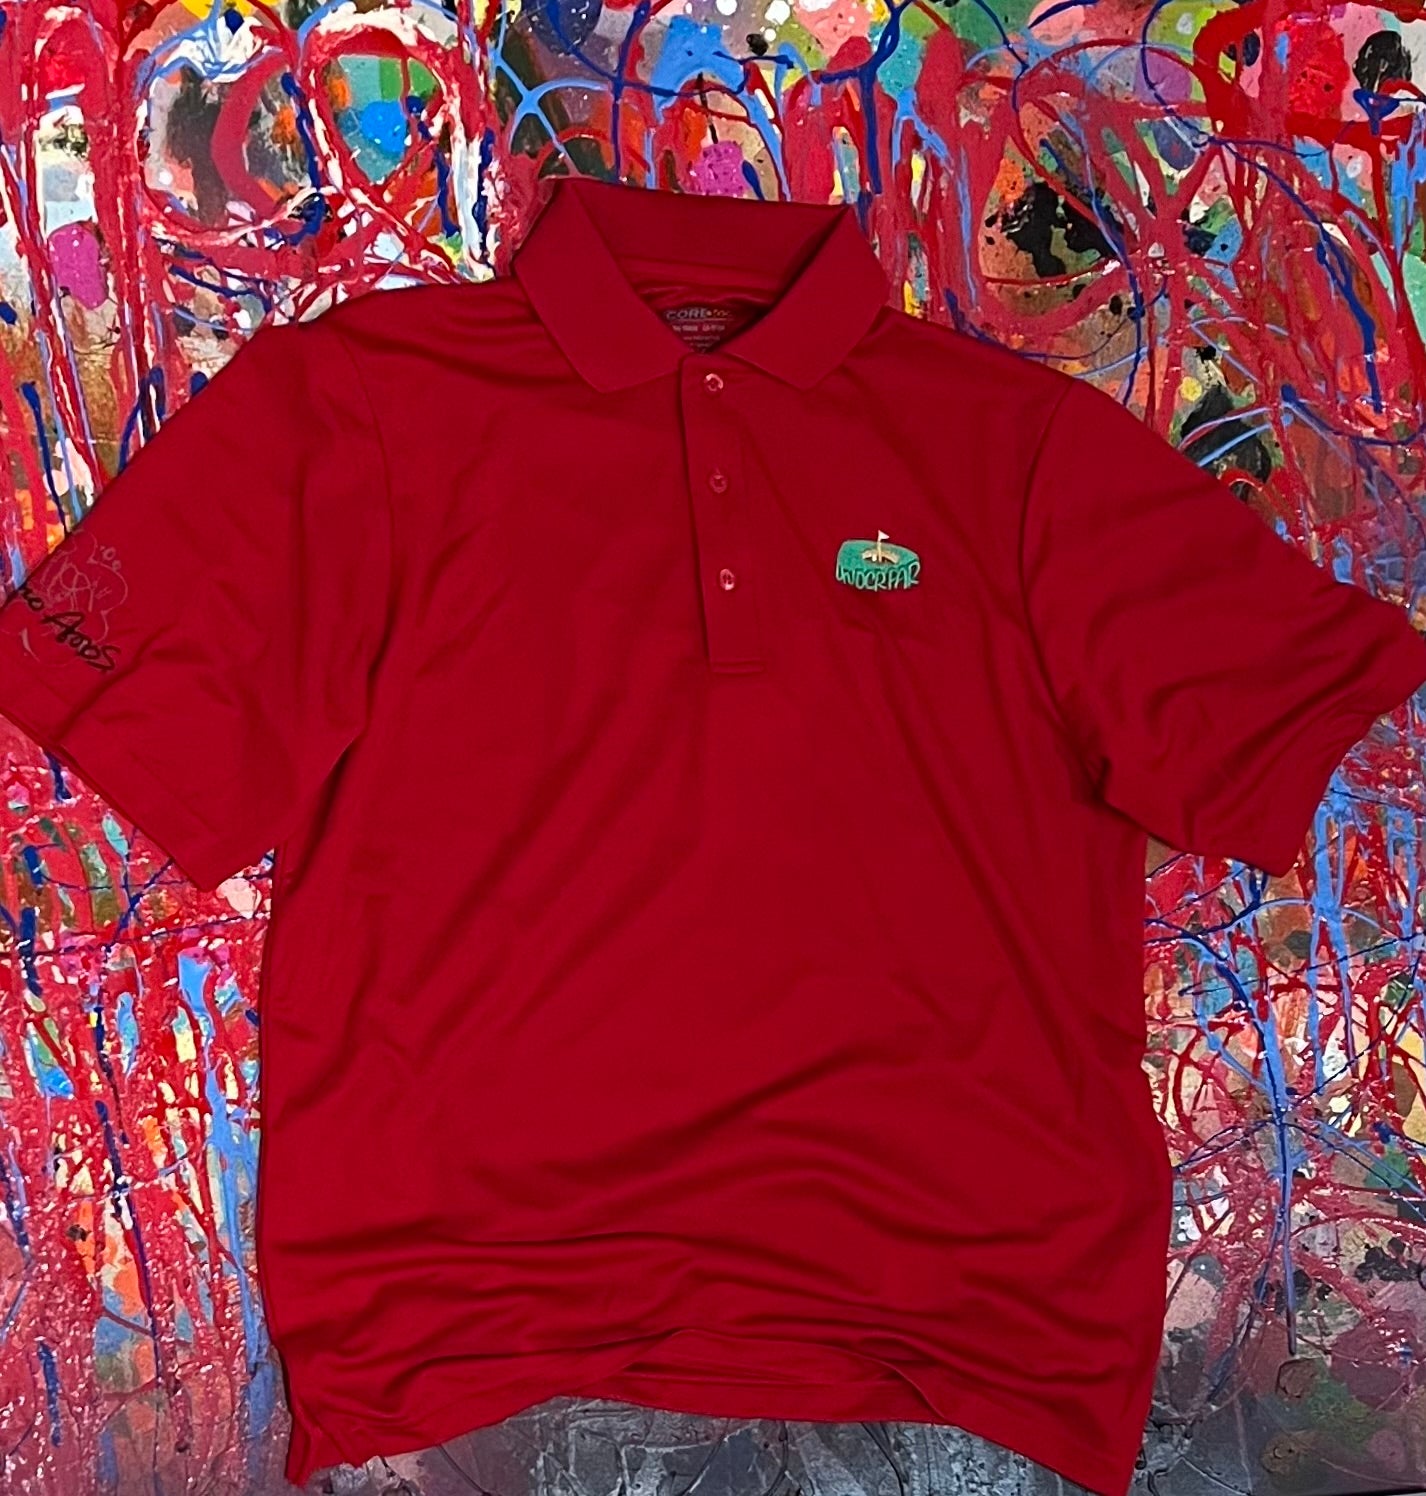 "Under PAR" Sports Polo by AMOS - Embroidered Logo - Red Polo